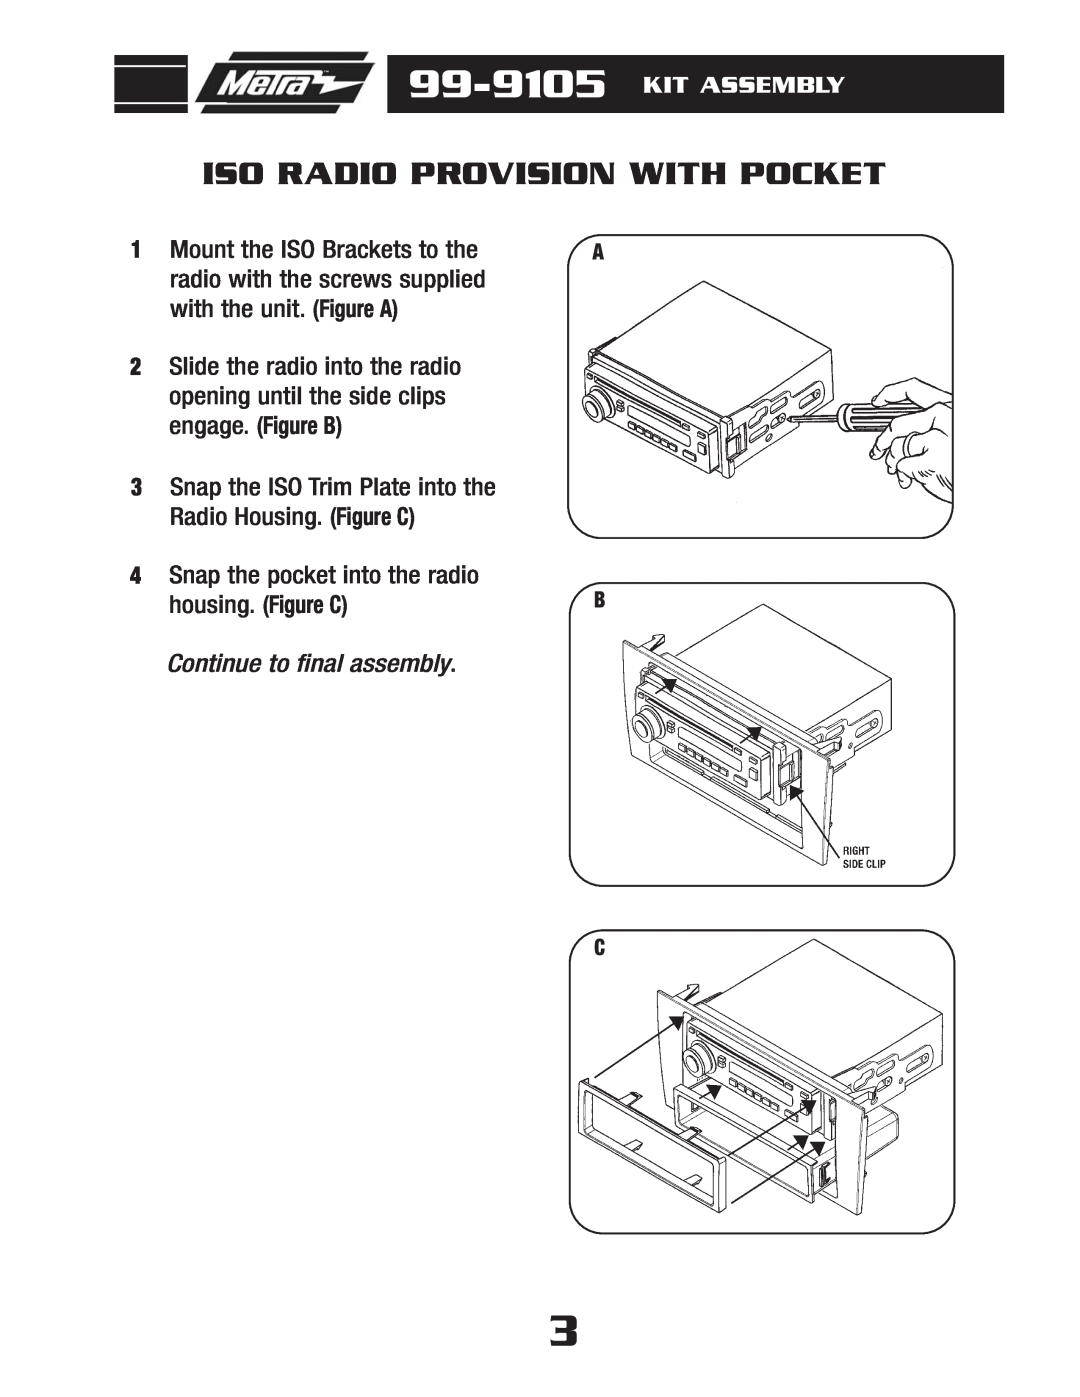 Metra Electronics 99-9105 Iso Radio Provision With Pocket, Kit Assembly, 4Snap the pocket into the radio housing. Figure C 